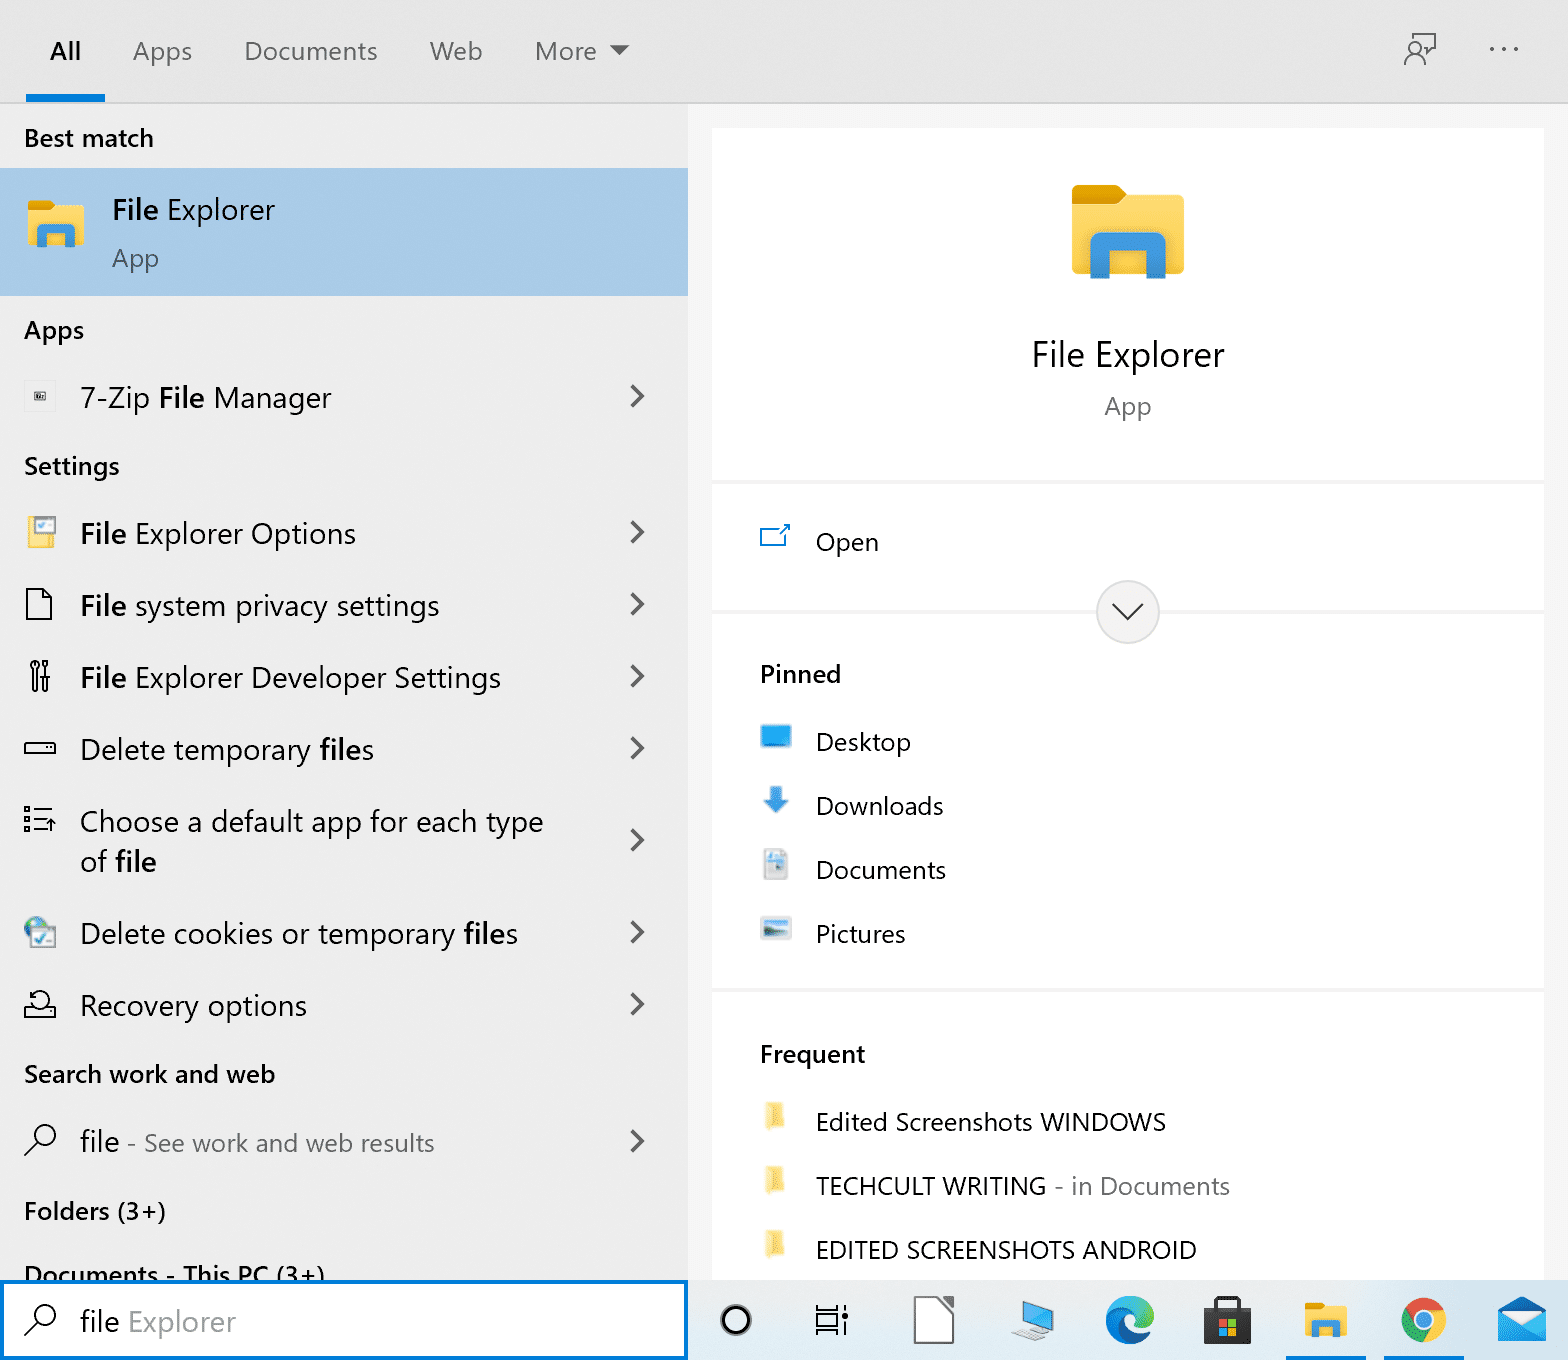 Launch File Explorer from Windows search